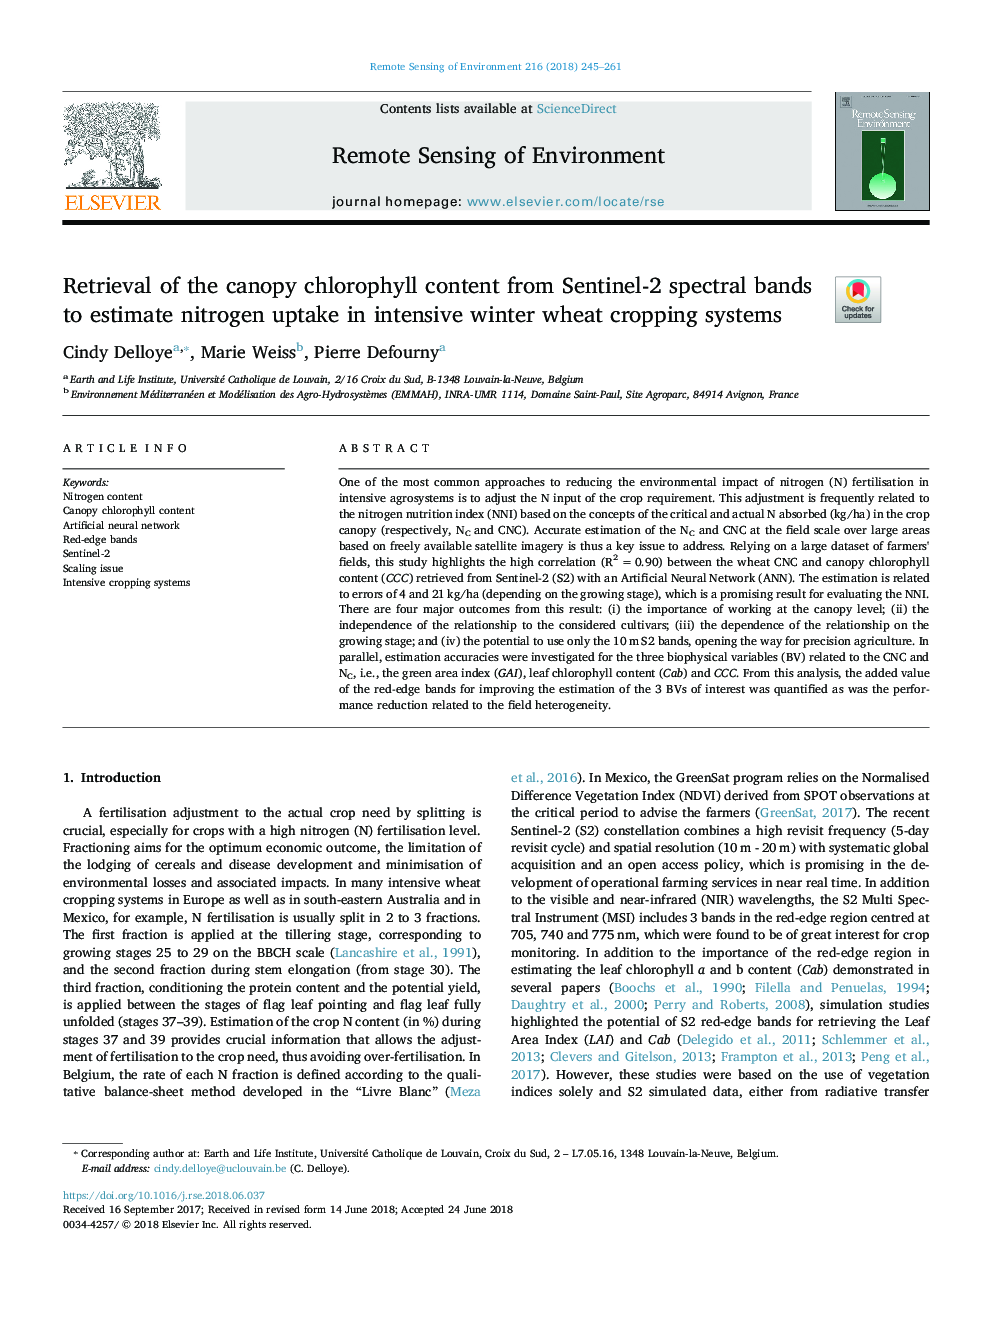 Retrieval of the canopy chlorophyll content from Sentinel-2 spectral bands to estimate nitrogen uptake in intensive winter wheat cropping systems